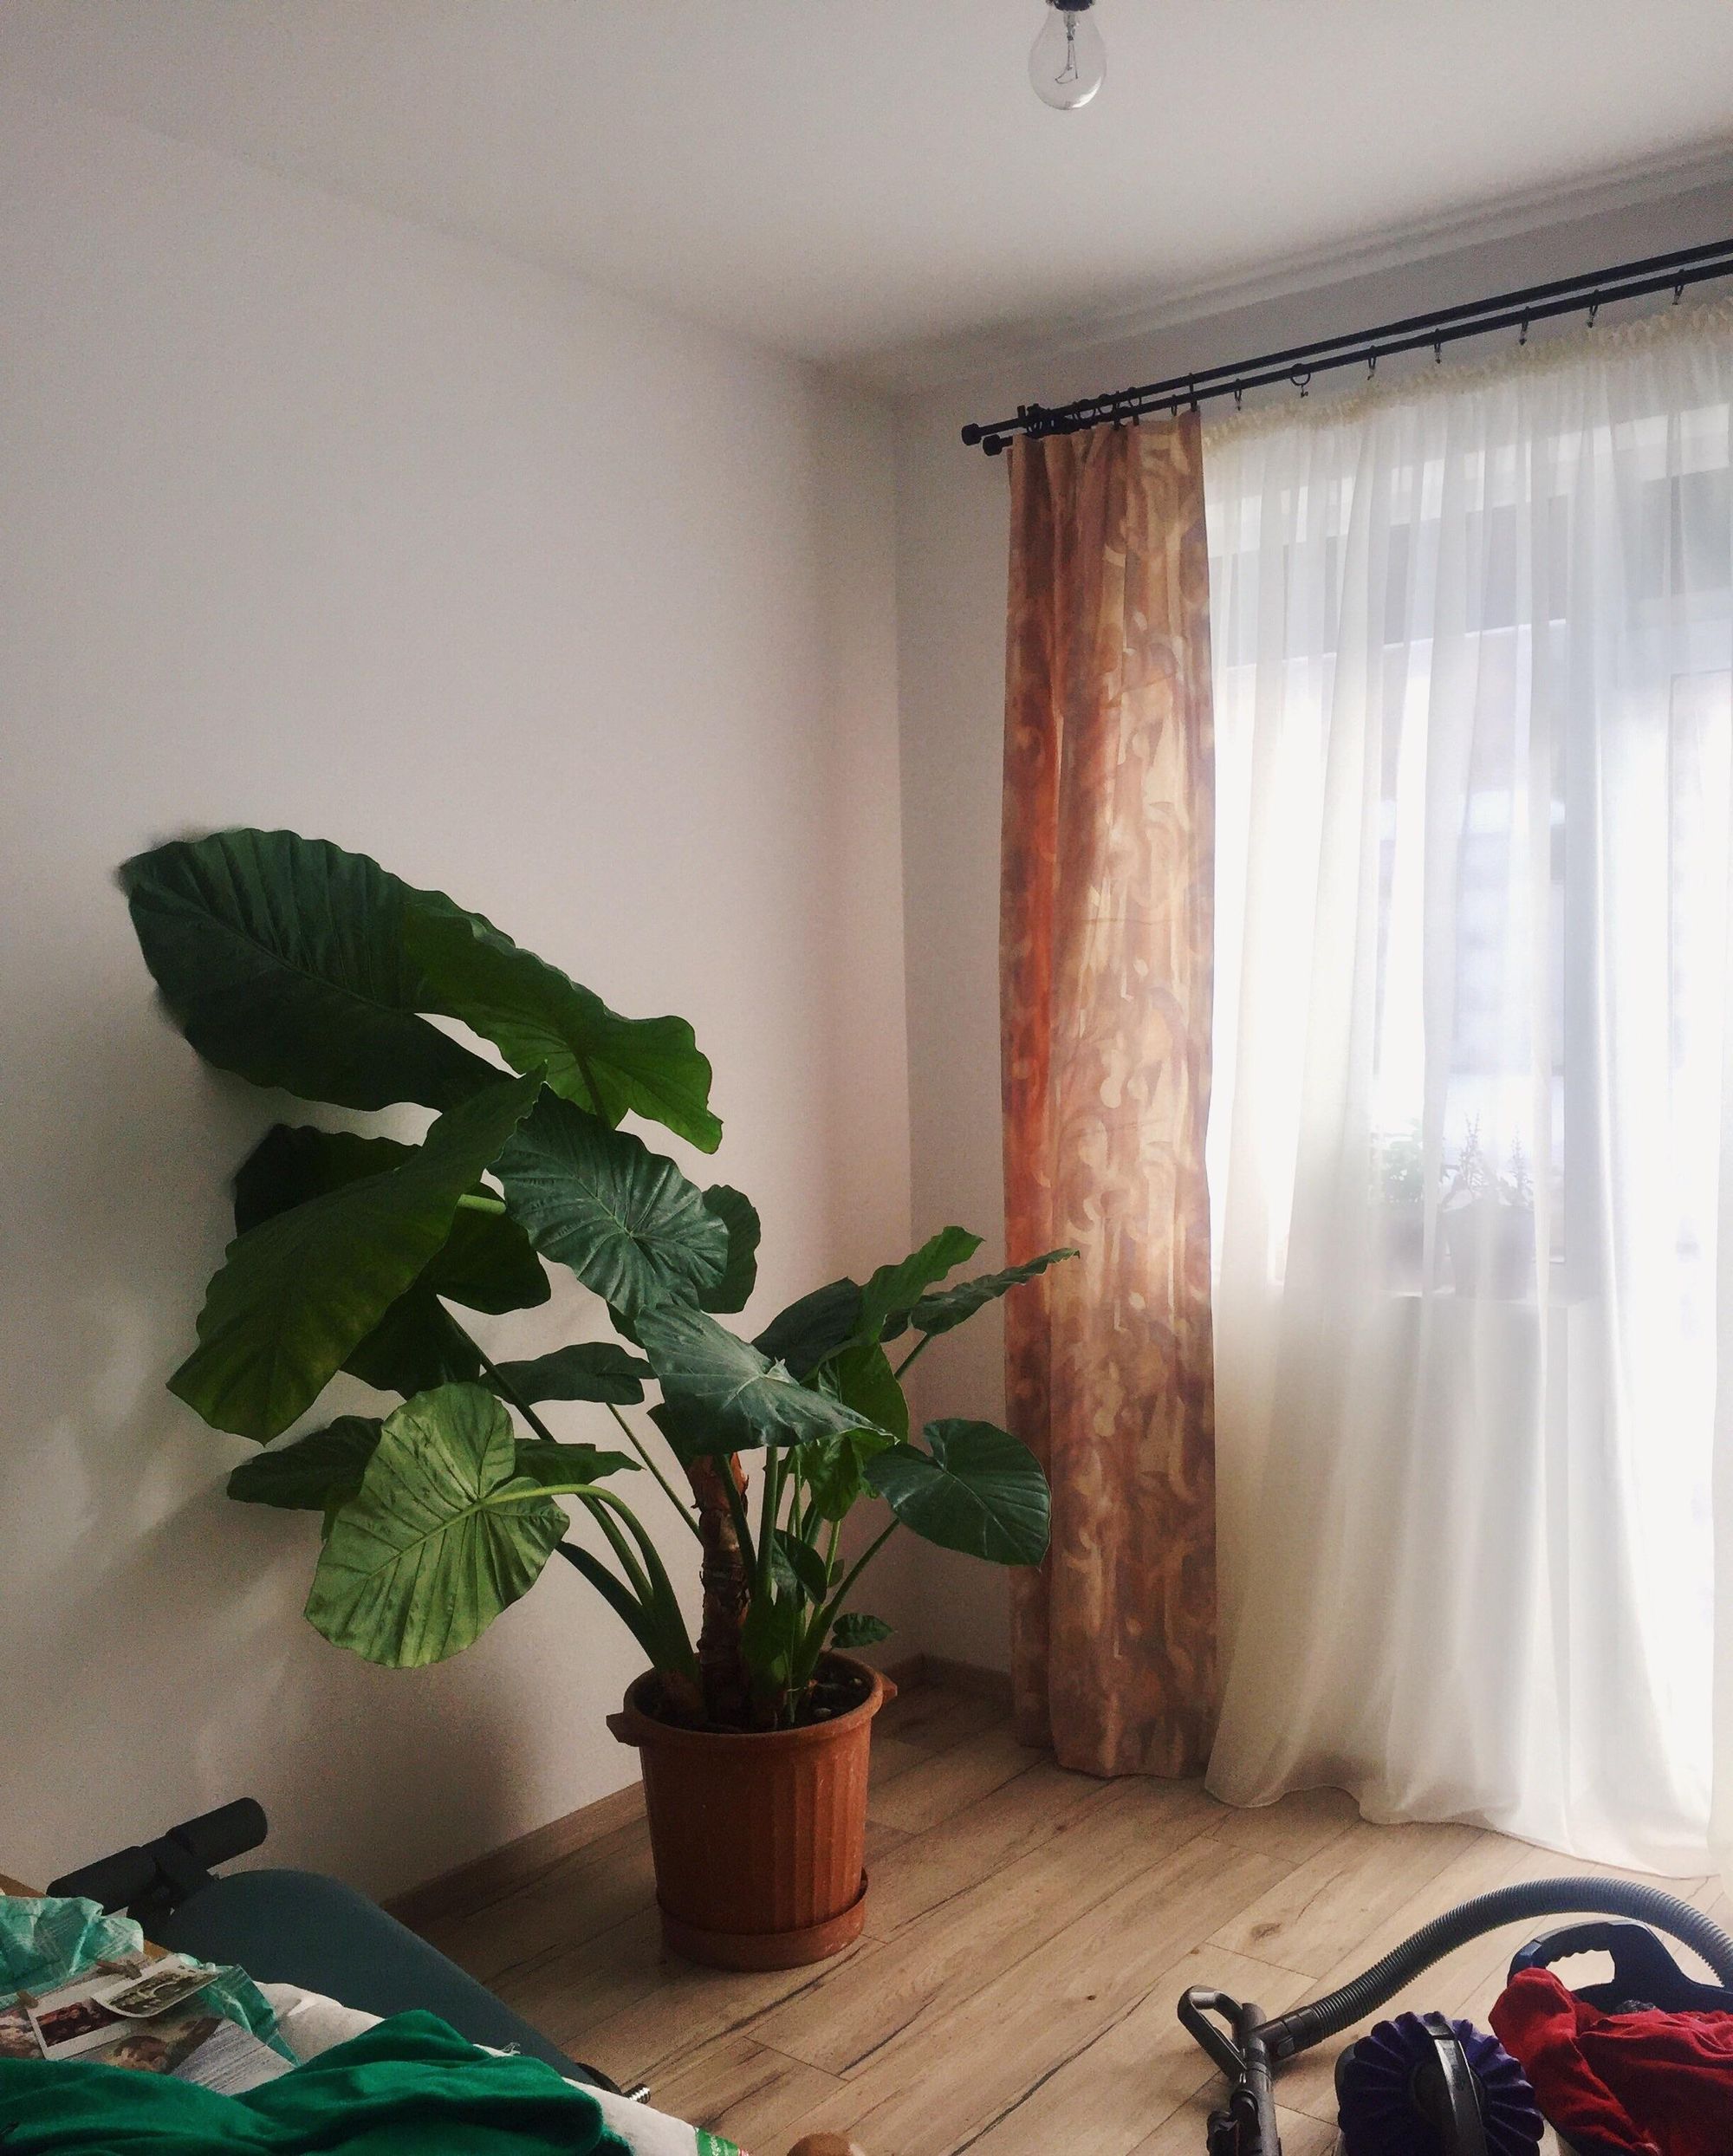 Everything you need to know about Elephant Ear Philodendron